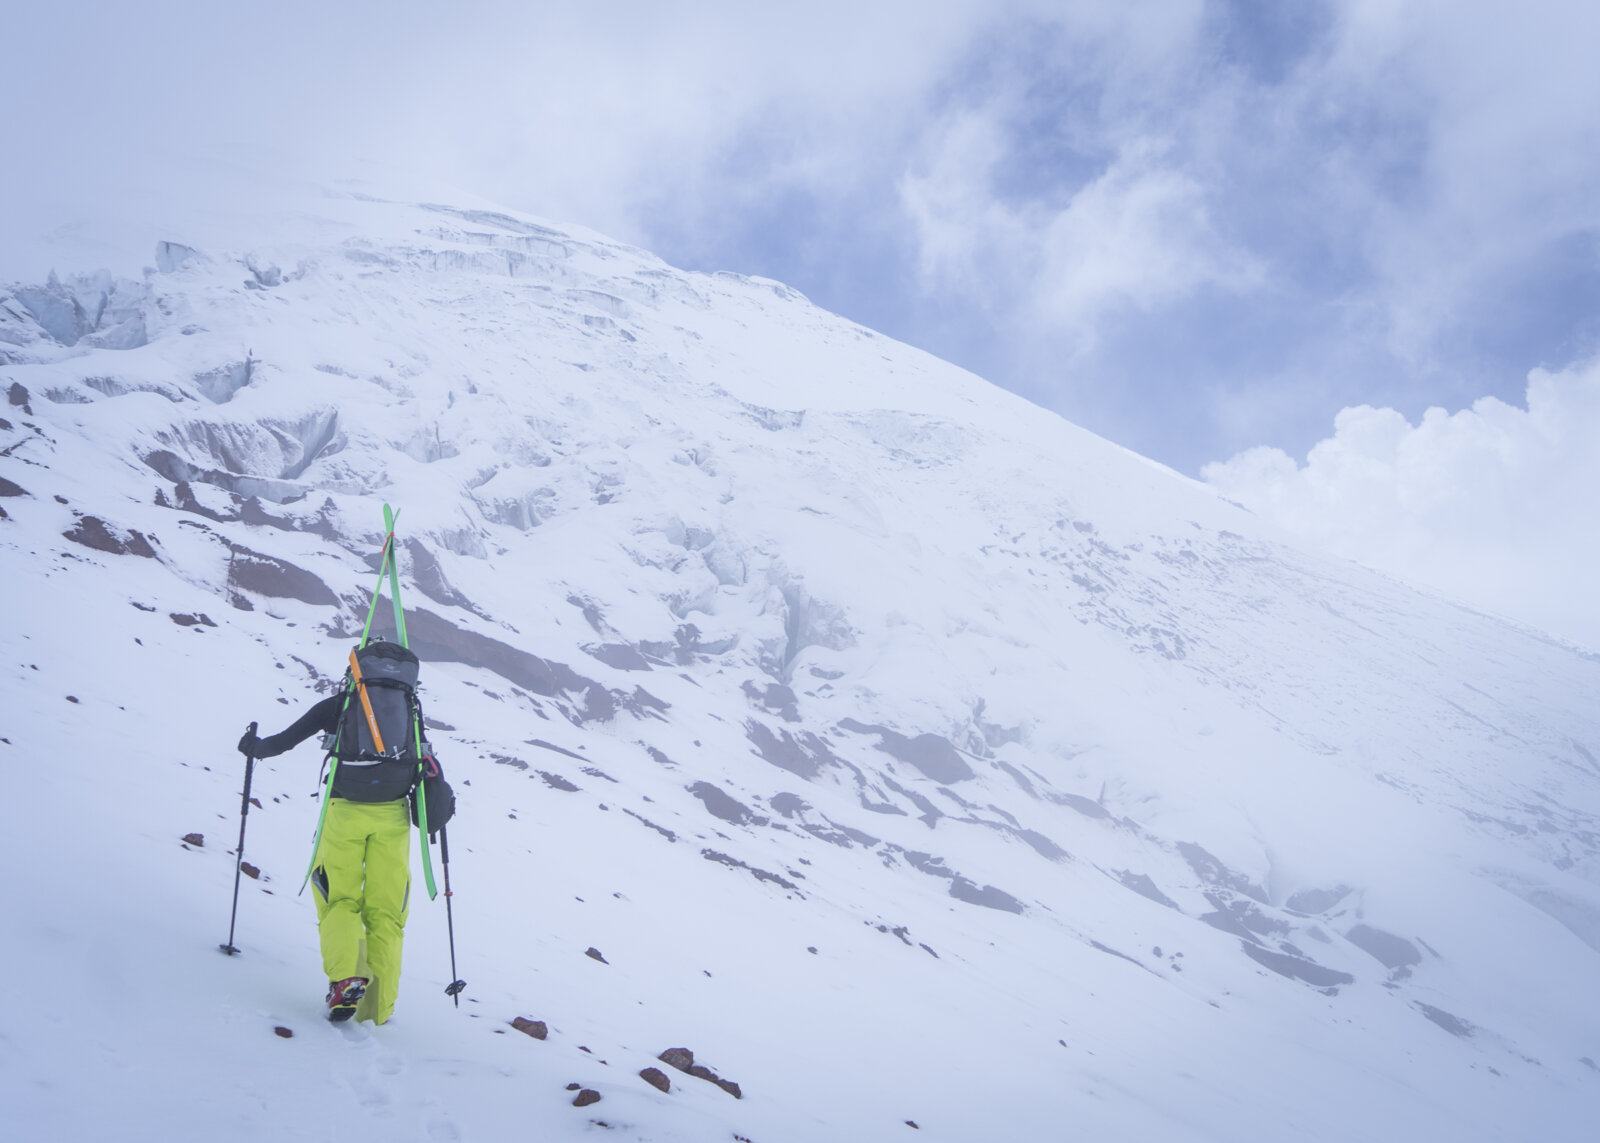 A climber heading up the route with skis to climb and ski Cotopaxi.